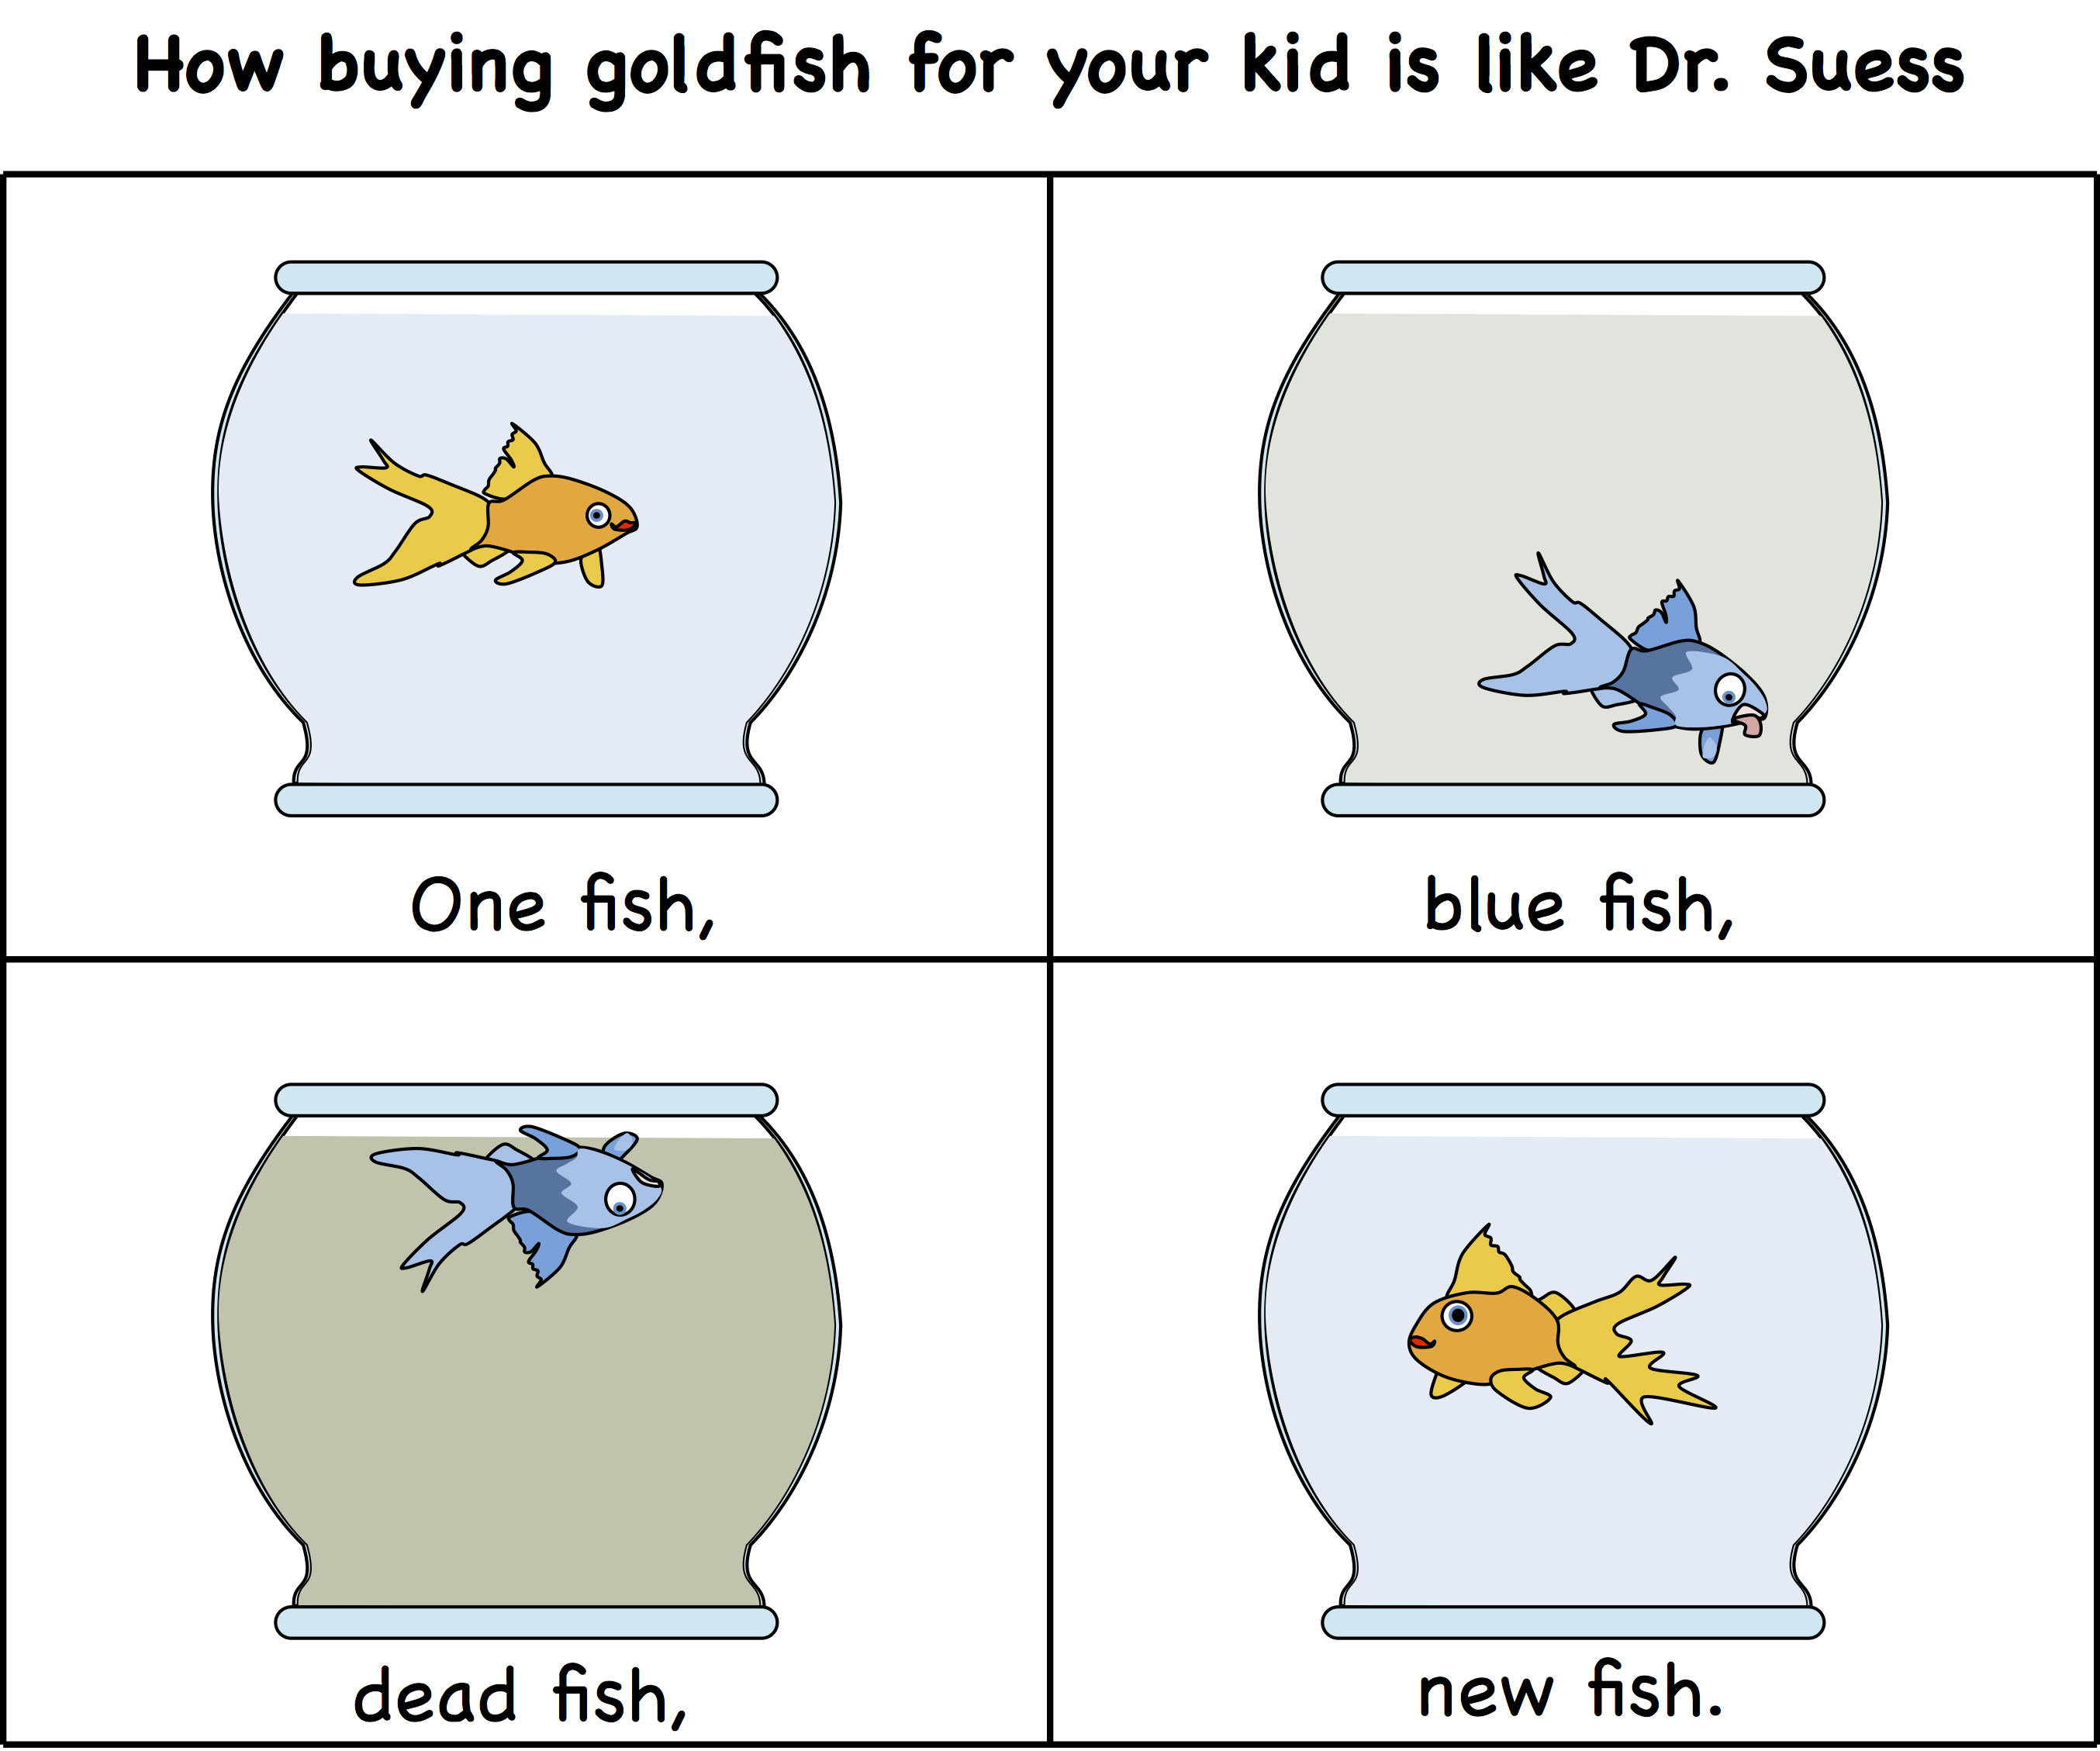 How gold fish are like Dr. Suess